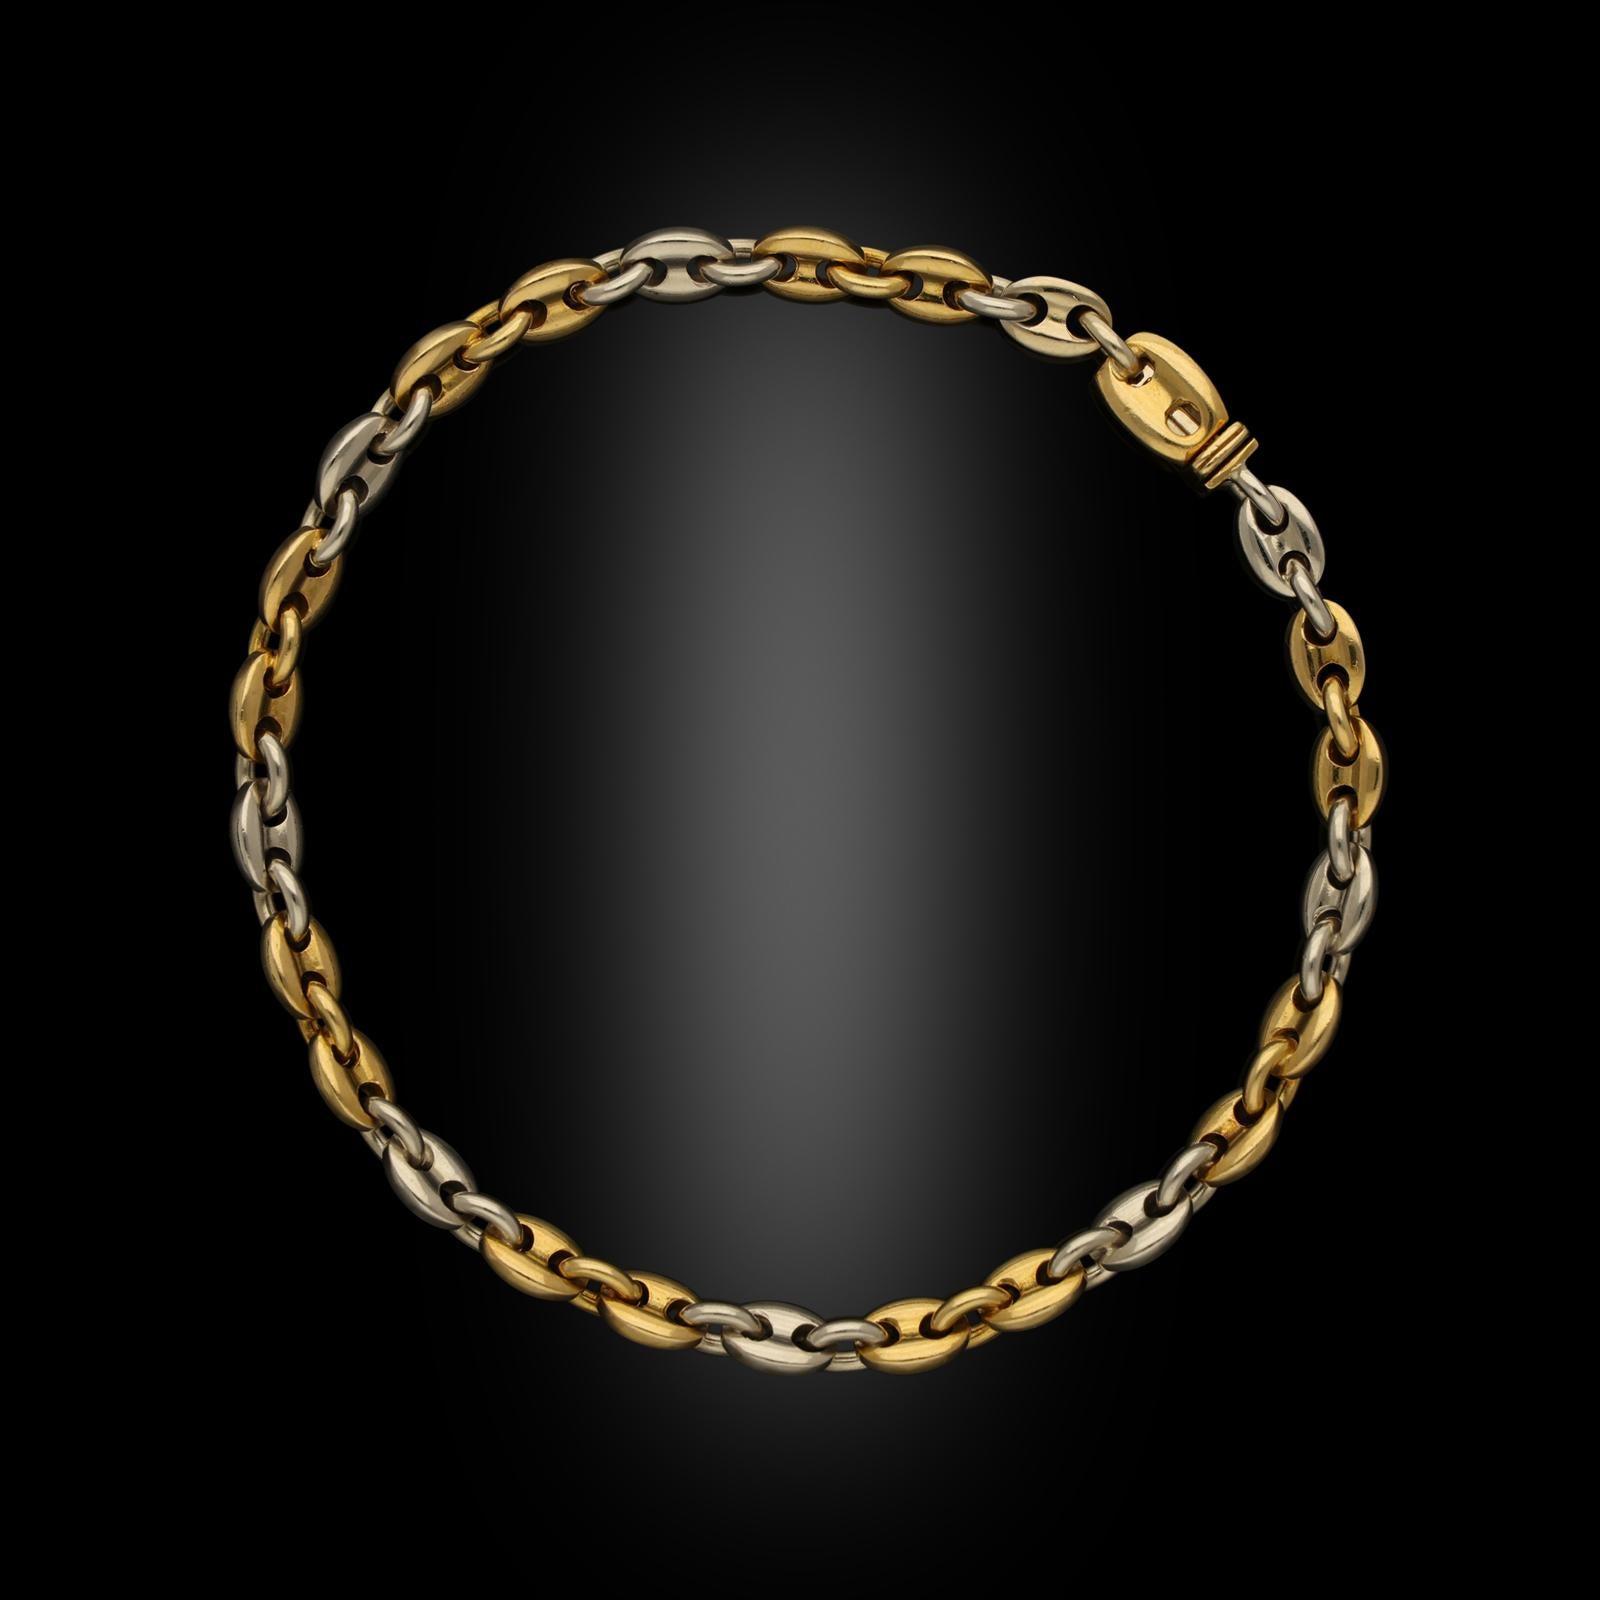 A classic 18ct gold Mariner long chain necklace by Cartier, circa 1990s, the two-tone gold necklace formed of uniform mariner links in a pattern of two yellow gold and one white gold repeated along the length, the long chain necklace separates to